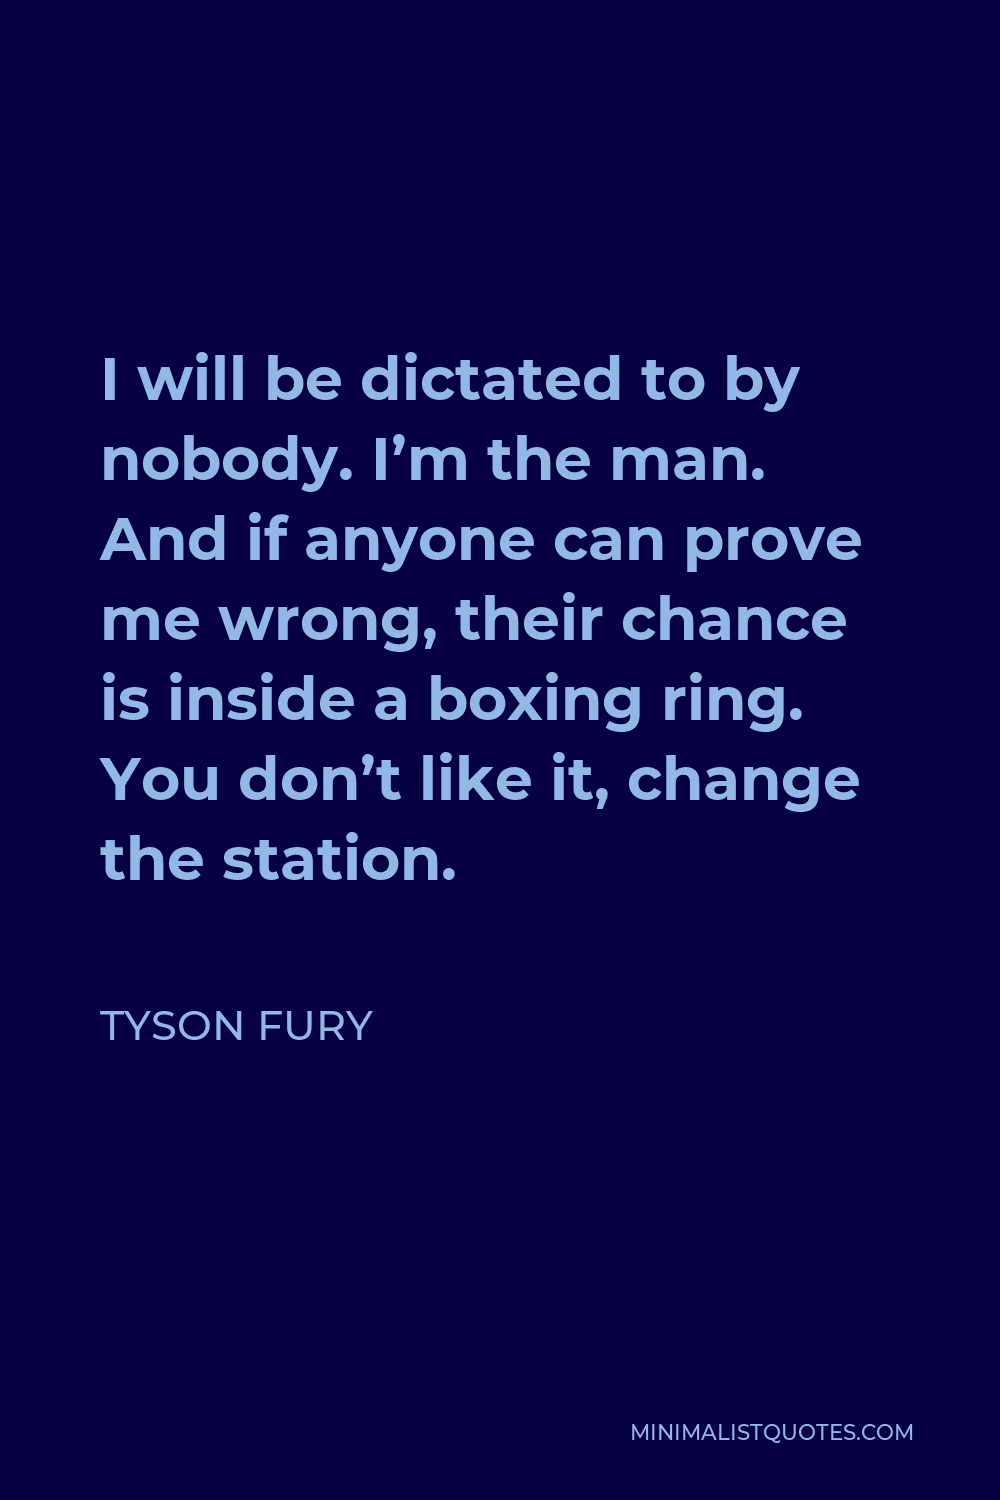 Tyson Fury Quote - I will be dictated to by nobody. I’m the man. And if anyone can prove me wrong, their chance is inside a boxing ring. You don’t like it, change the station.